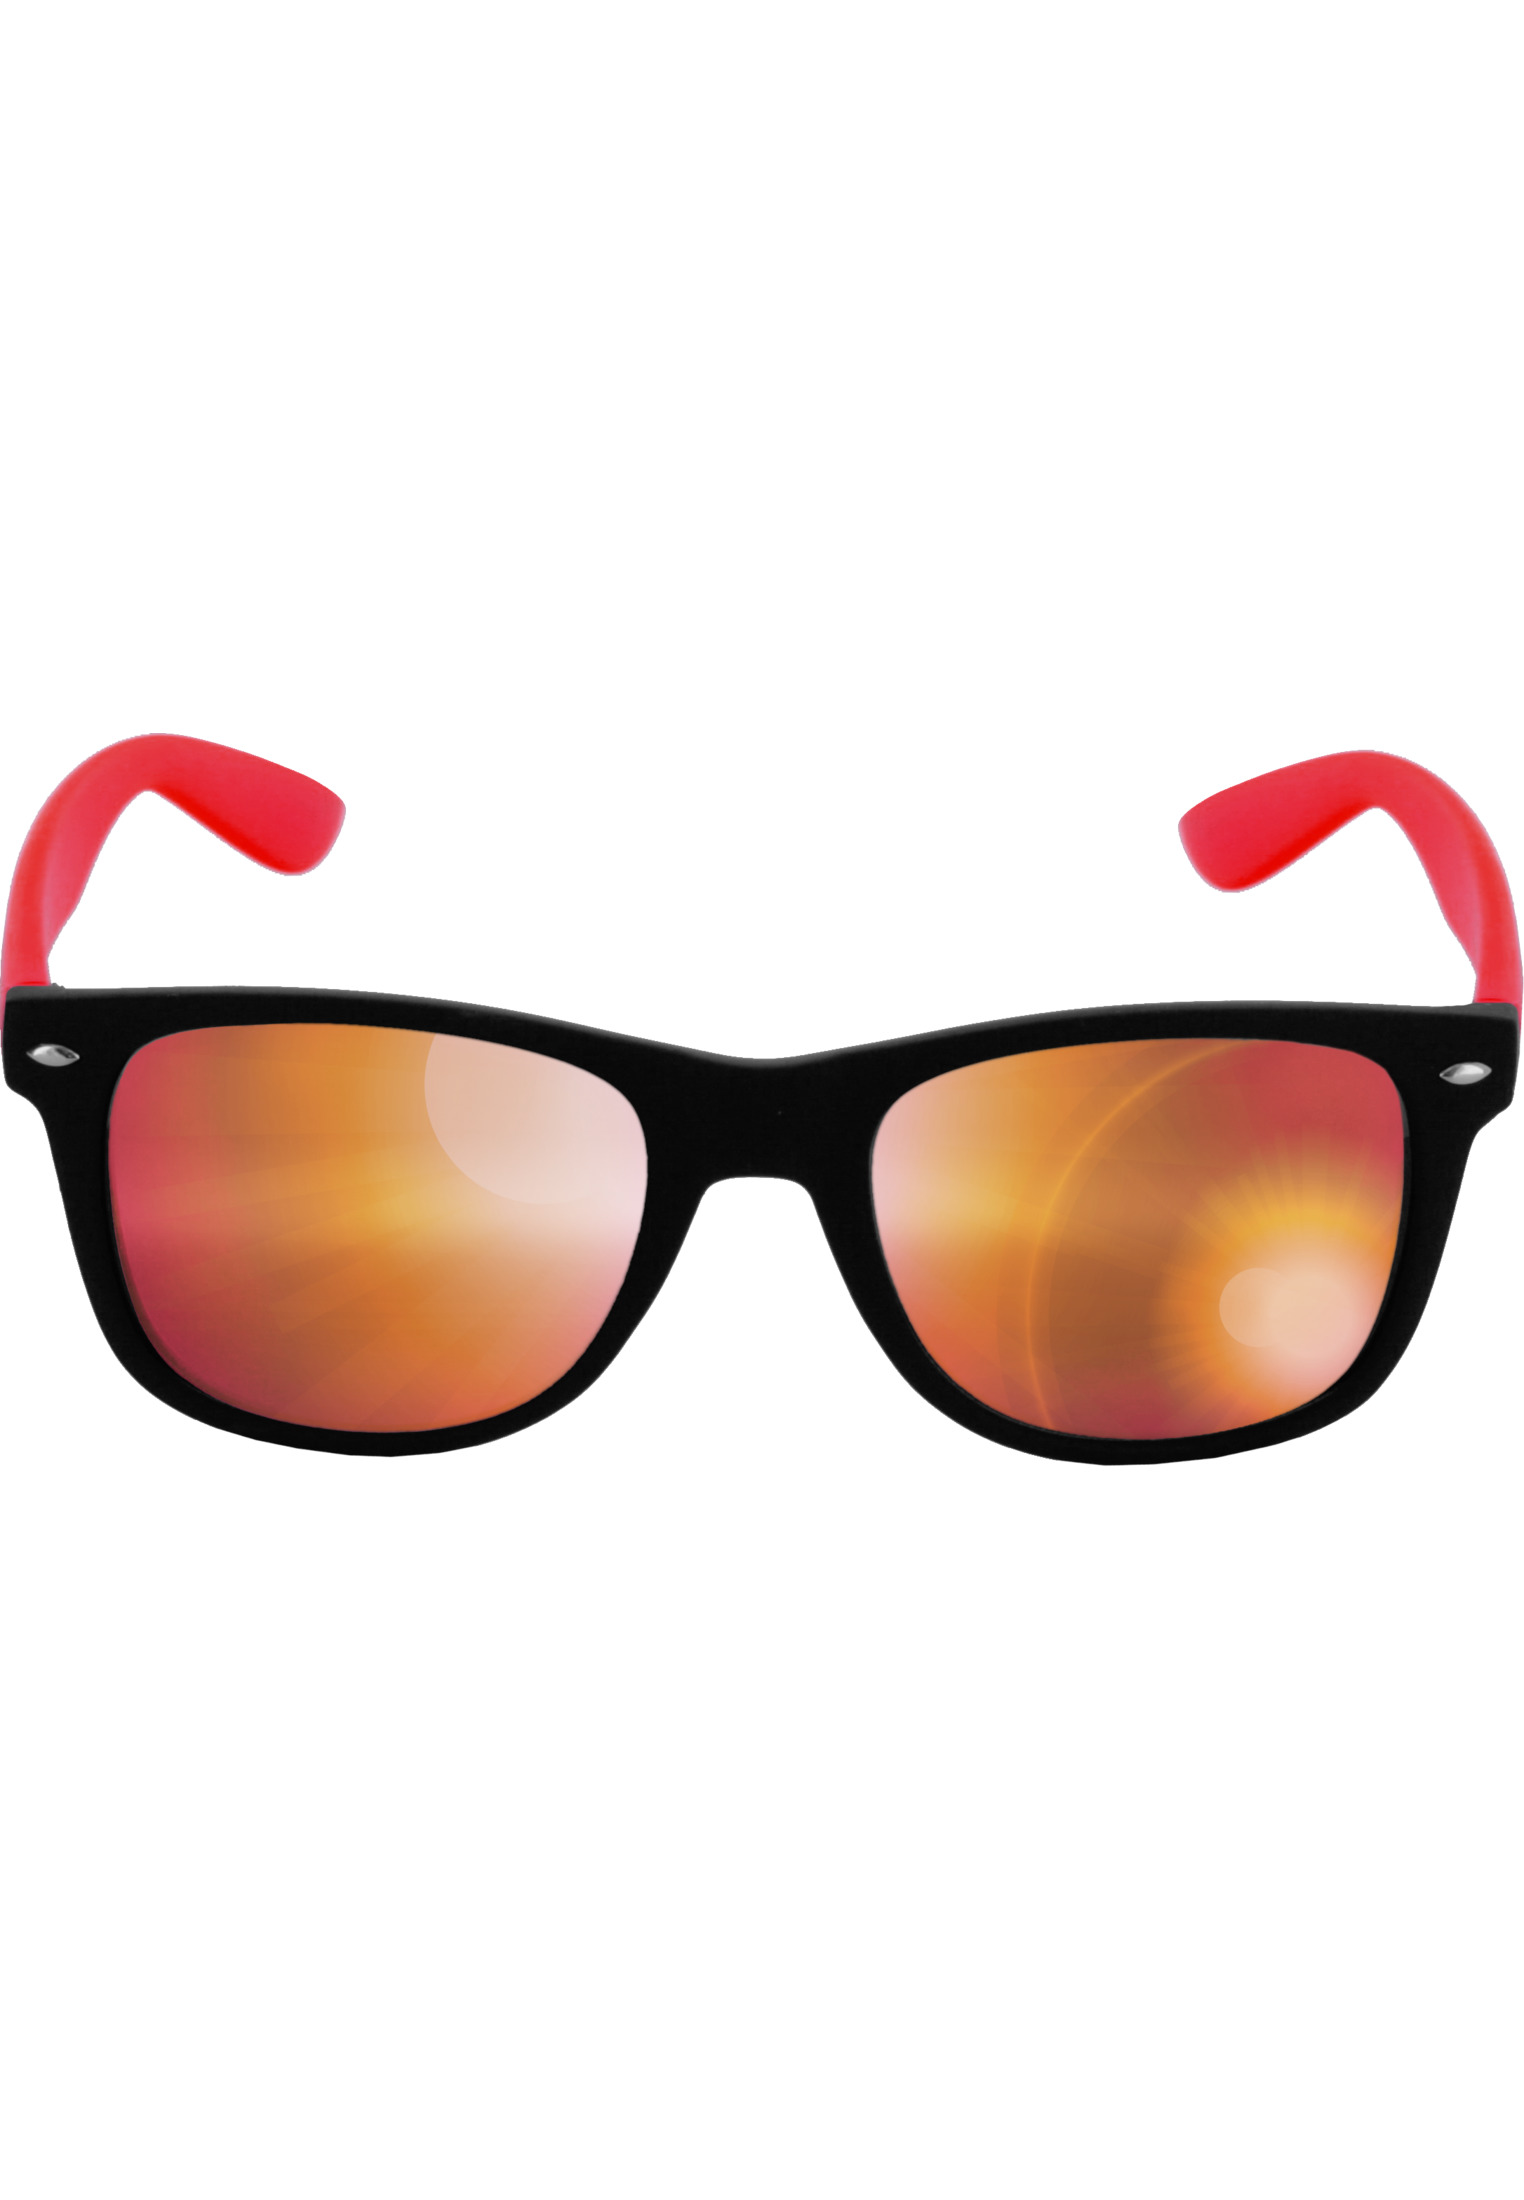 Likoma Mirror blk/red/red sunglasses